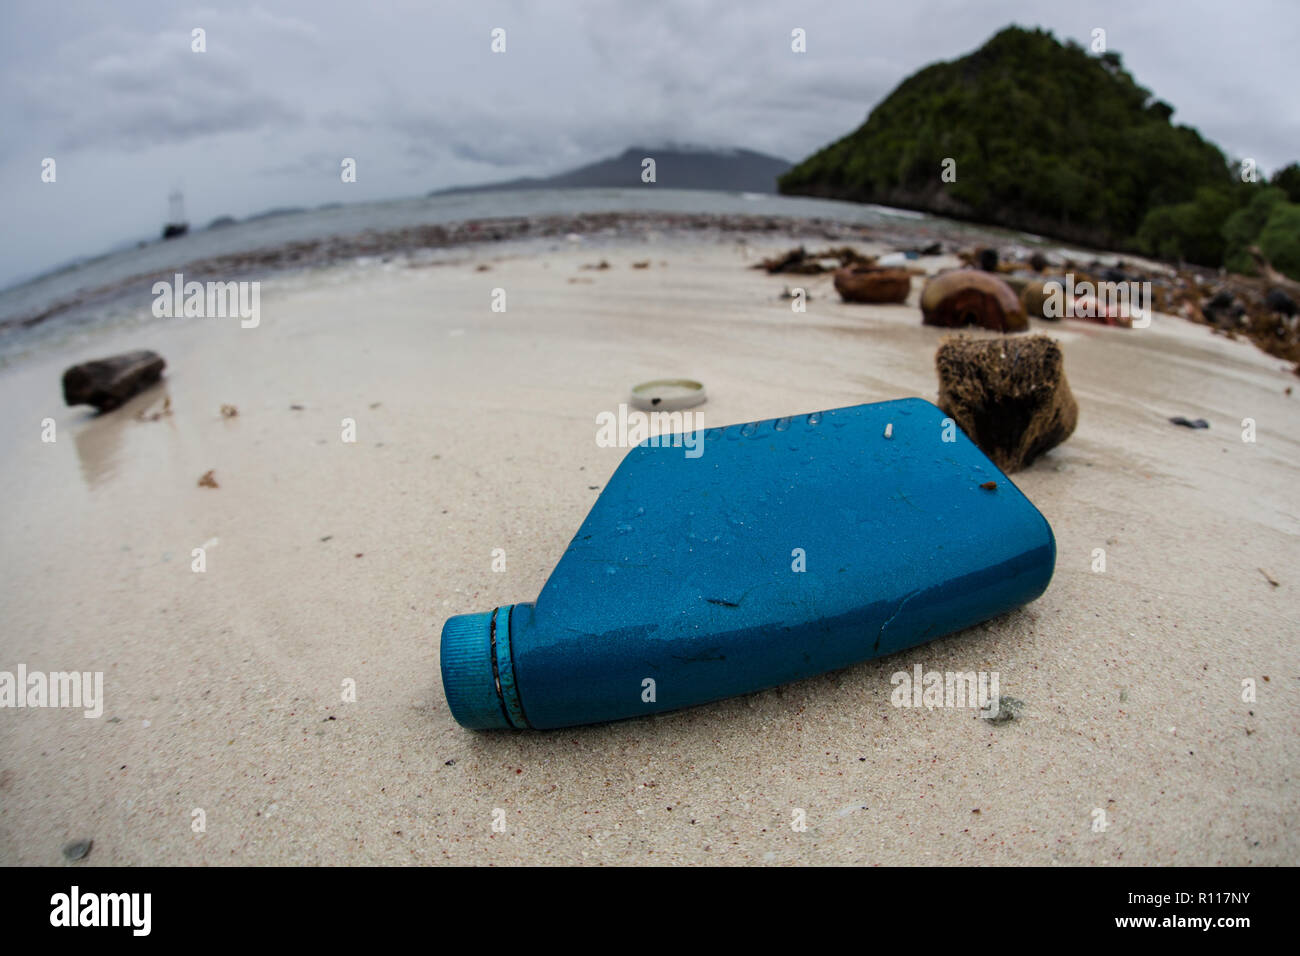 Discarded plastic bottles have washed up on a remote beach in Raja Ampat, Indonesia. Plastics break down into tiny pieces and enter the food chain. Stock Photo